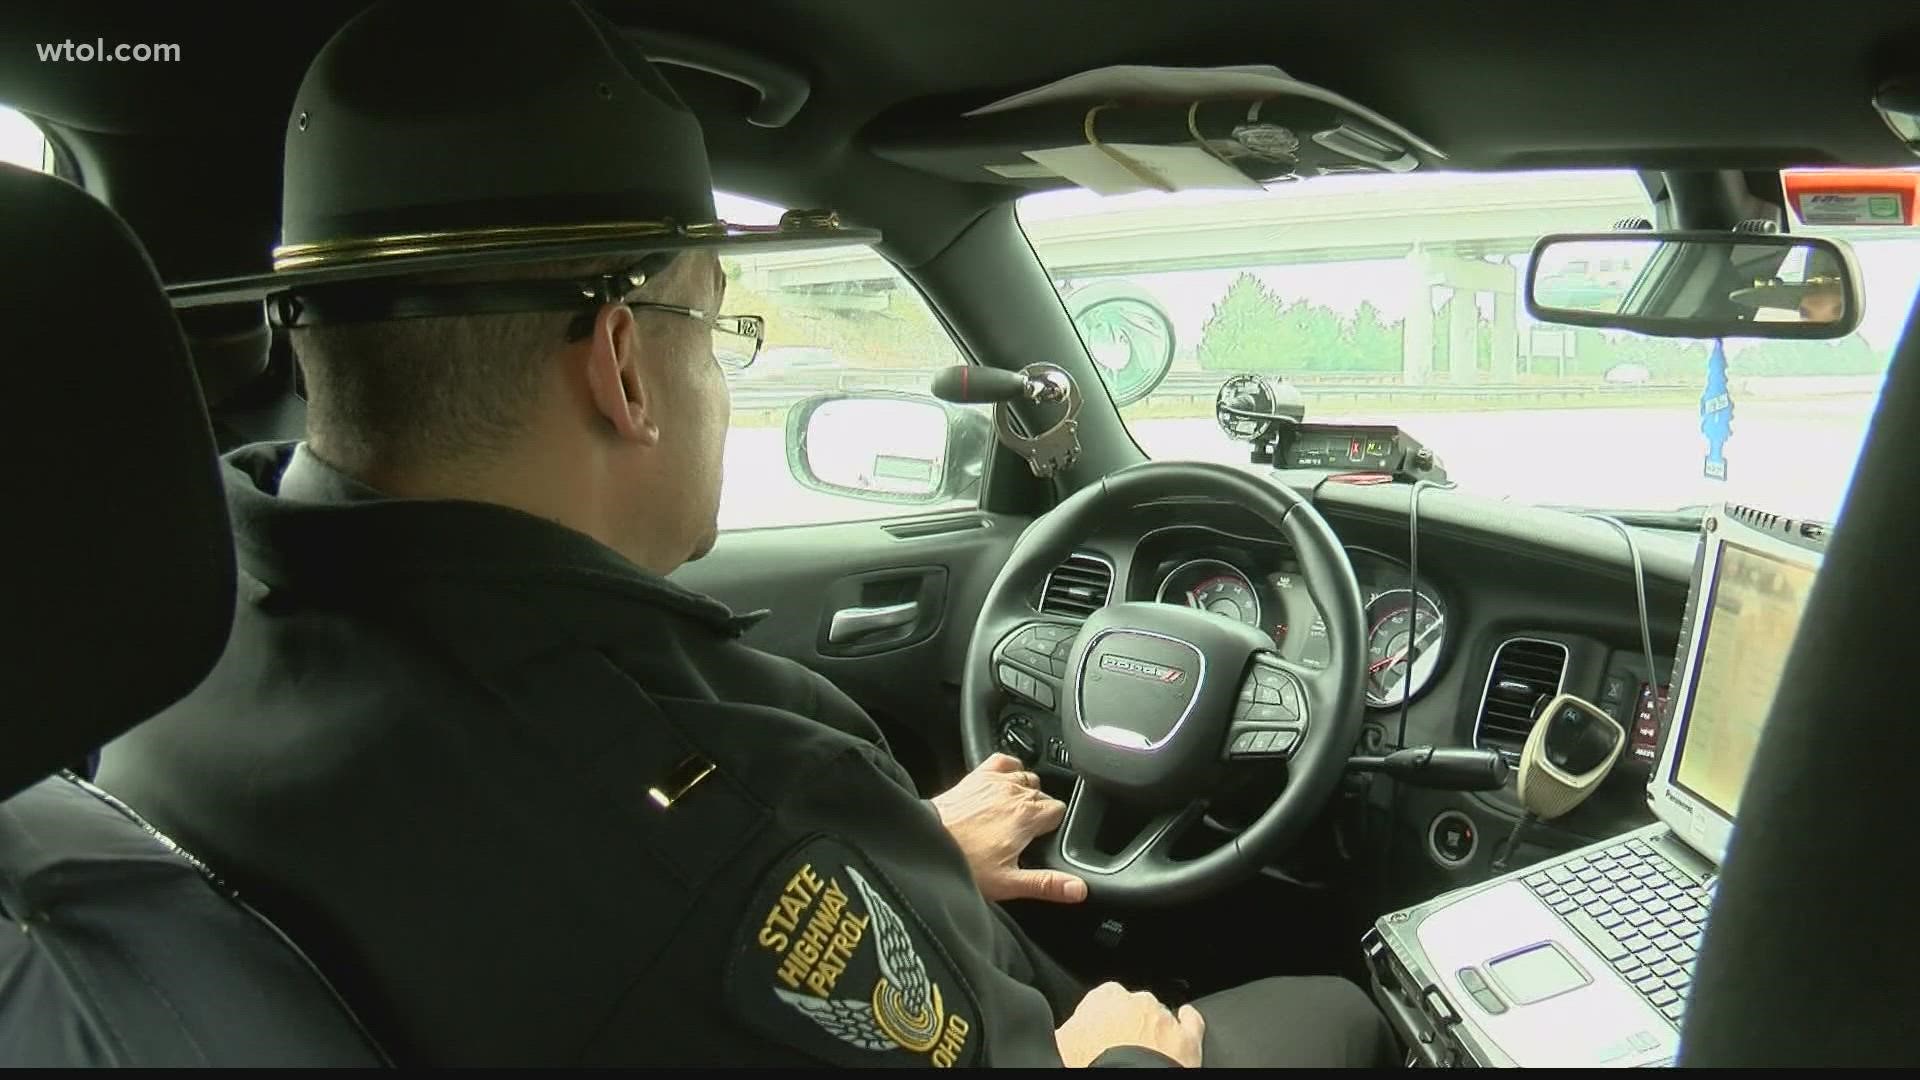 Last year, the Wednesday before Thanksgiving was the busiest crash day for Ohio State Highway Patrol over the course of the holiday weekend.